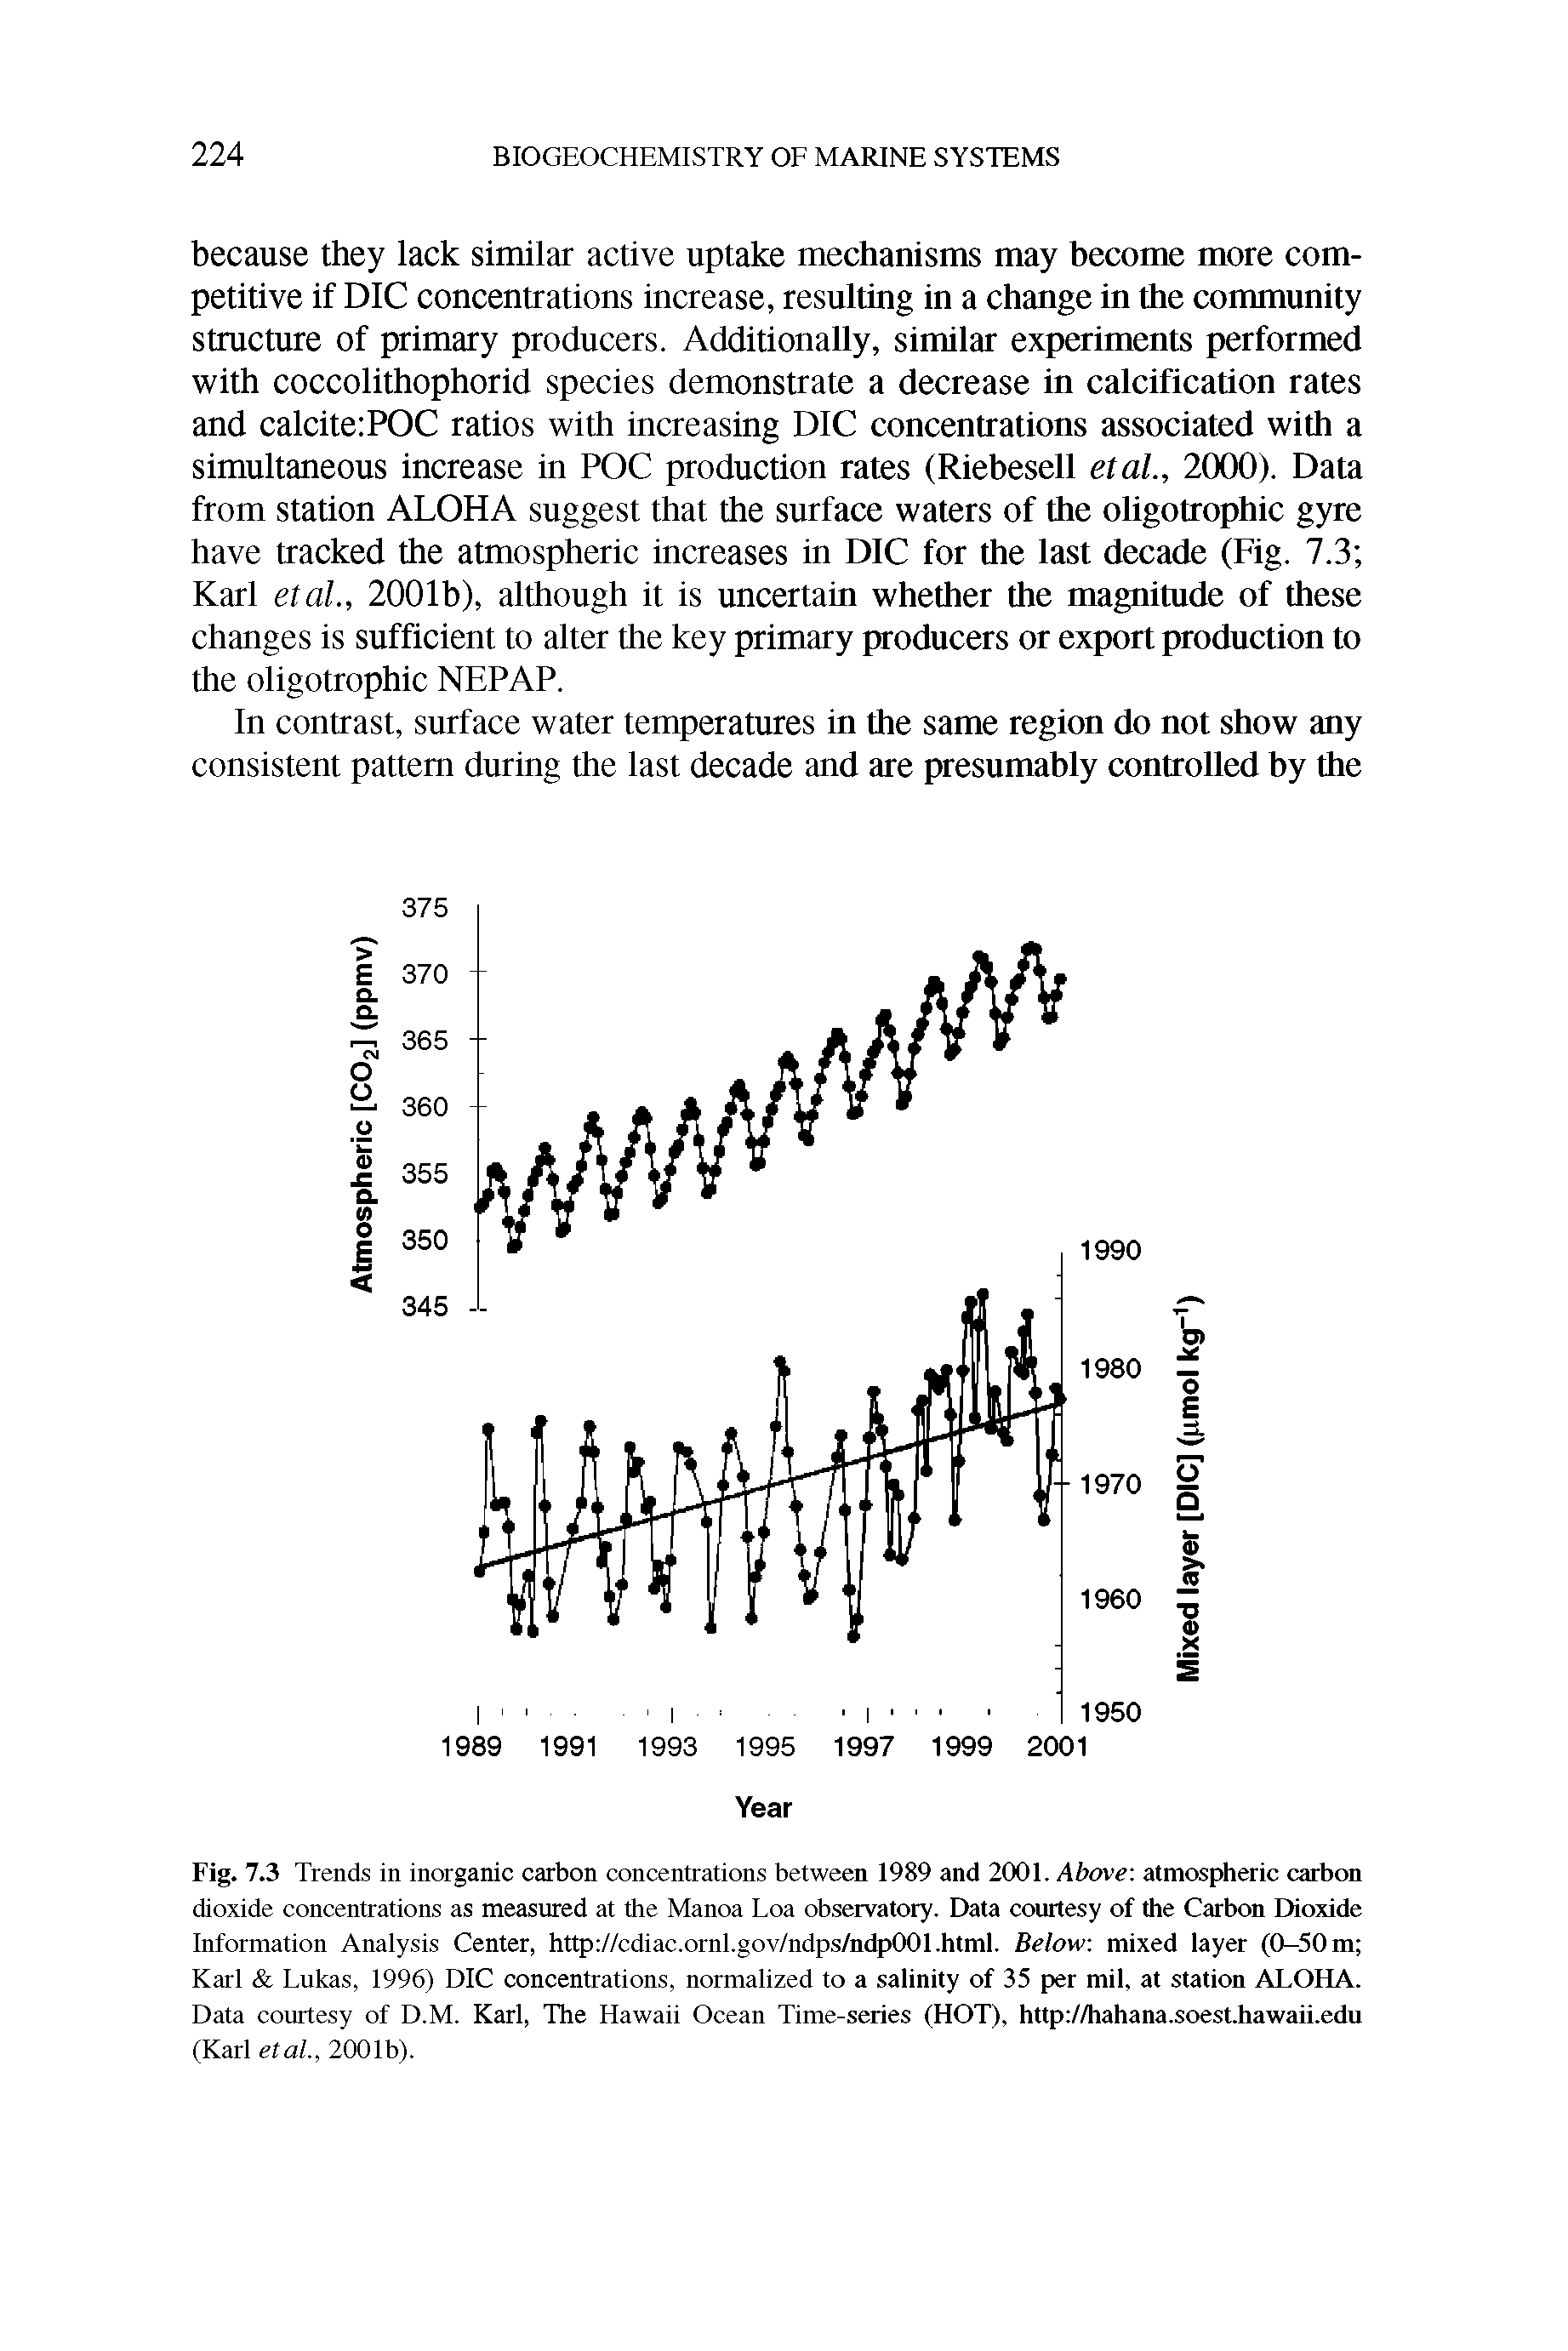 Fig. 7.3 Trends in inorganic carbon concentrations between 1989 and 2001. Above, atmospheric carbon dioxide concentrations as measured at the Manoa Loa observatory. Data courtesy of the Carbon Dioxide Information Analysis Center, http //cdiac.ornl.gov/ndps/ndp001.html. Below mixed layer (0-50 m Karl Lukas, 1996) DIC concentrations, normalized to a salinity of 35 per mil, at station ALOHA. Data courtesy of D.M. Karl, The Hawaii Ocean Time-series (HOT), http //hahana.soest.hawaii.edu (Karl etal., 2001b).